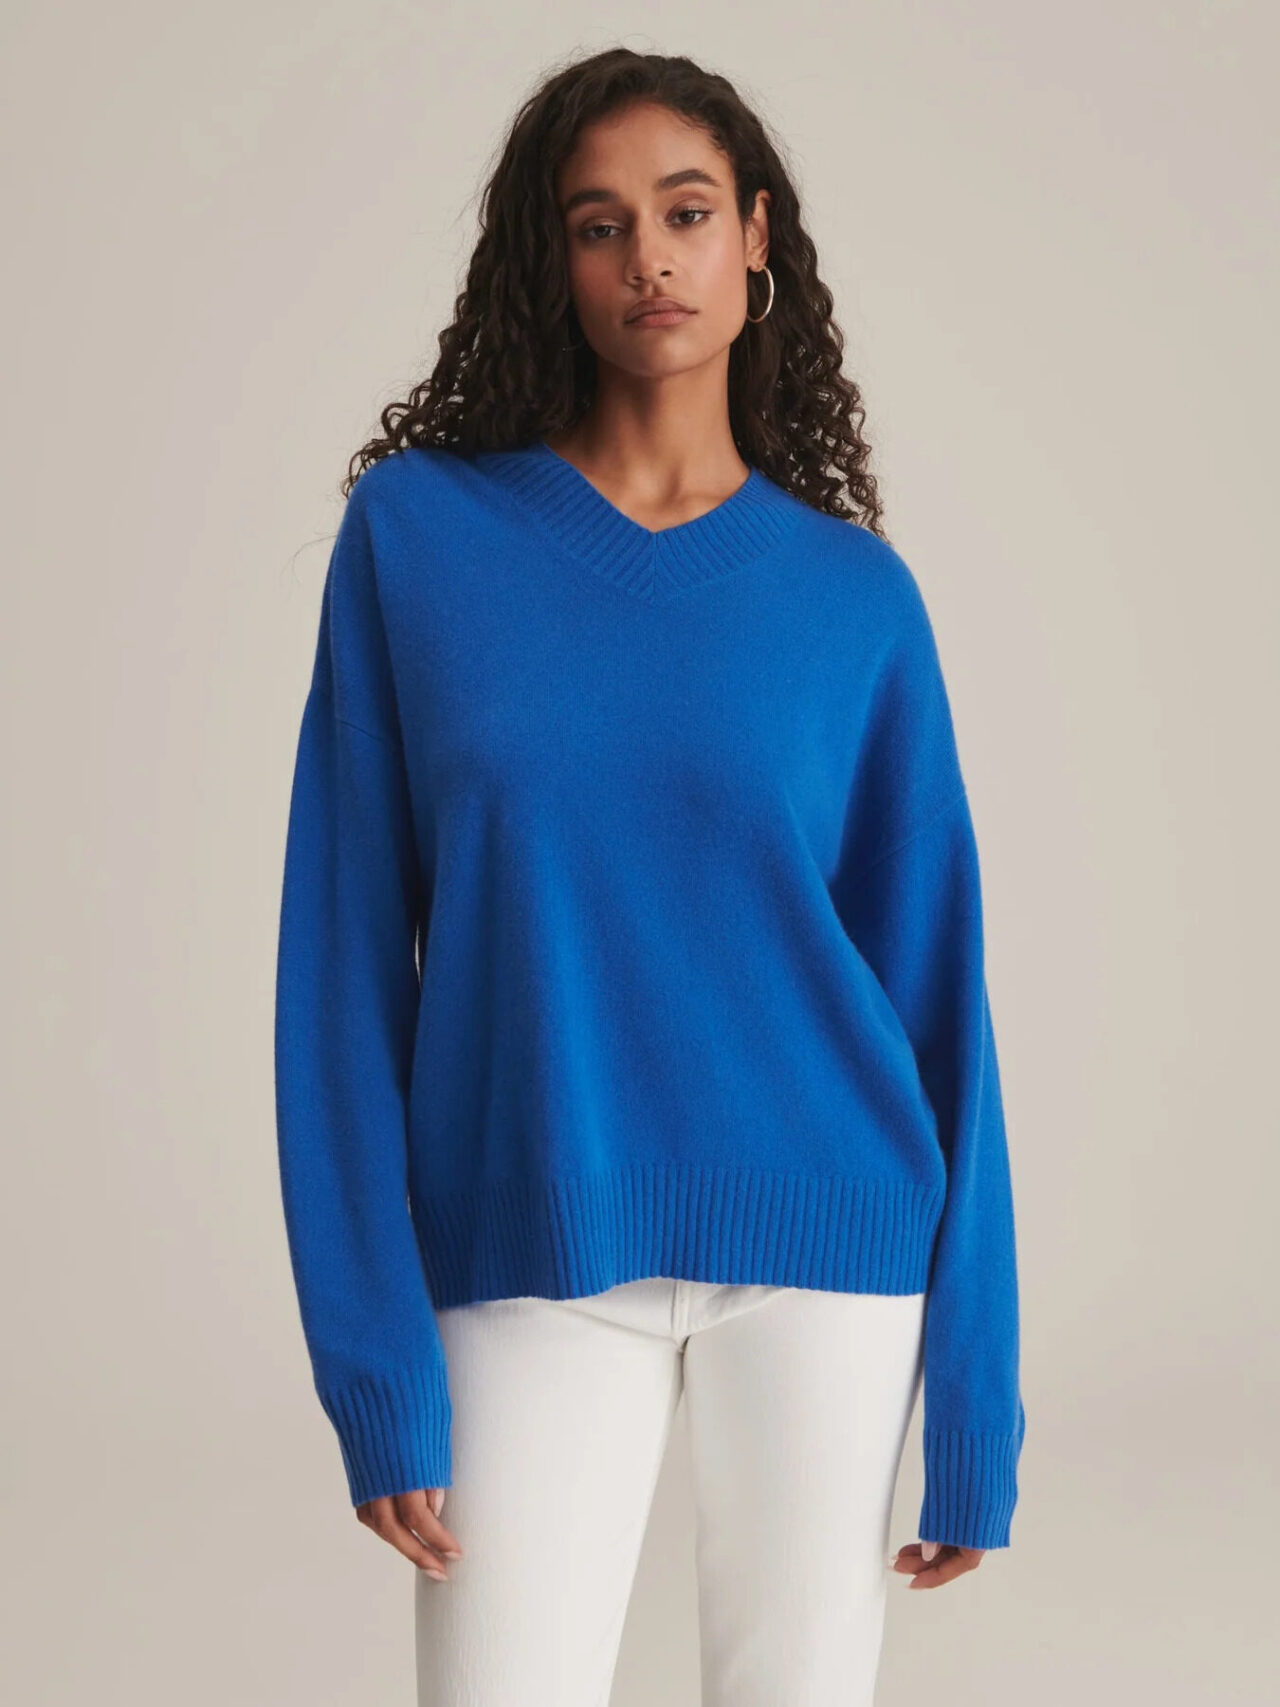 10 Sustainable Sweaters & Cardigans For 2023 - The Good Trade